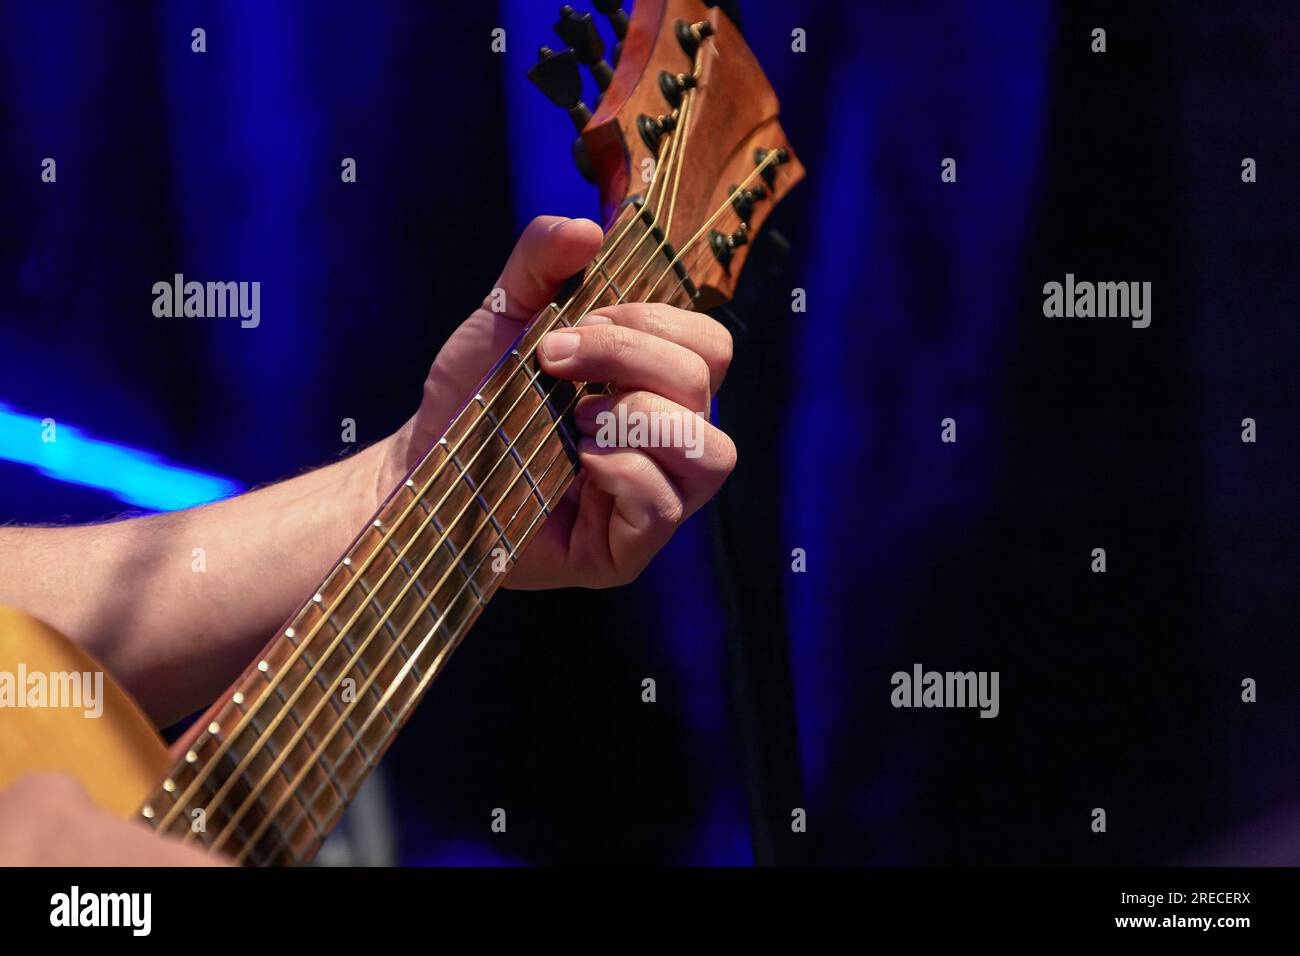 Image of fingers taking a chord on the fretboard of an acoustic guitar Stock Photo